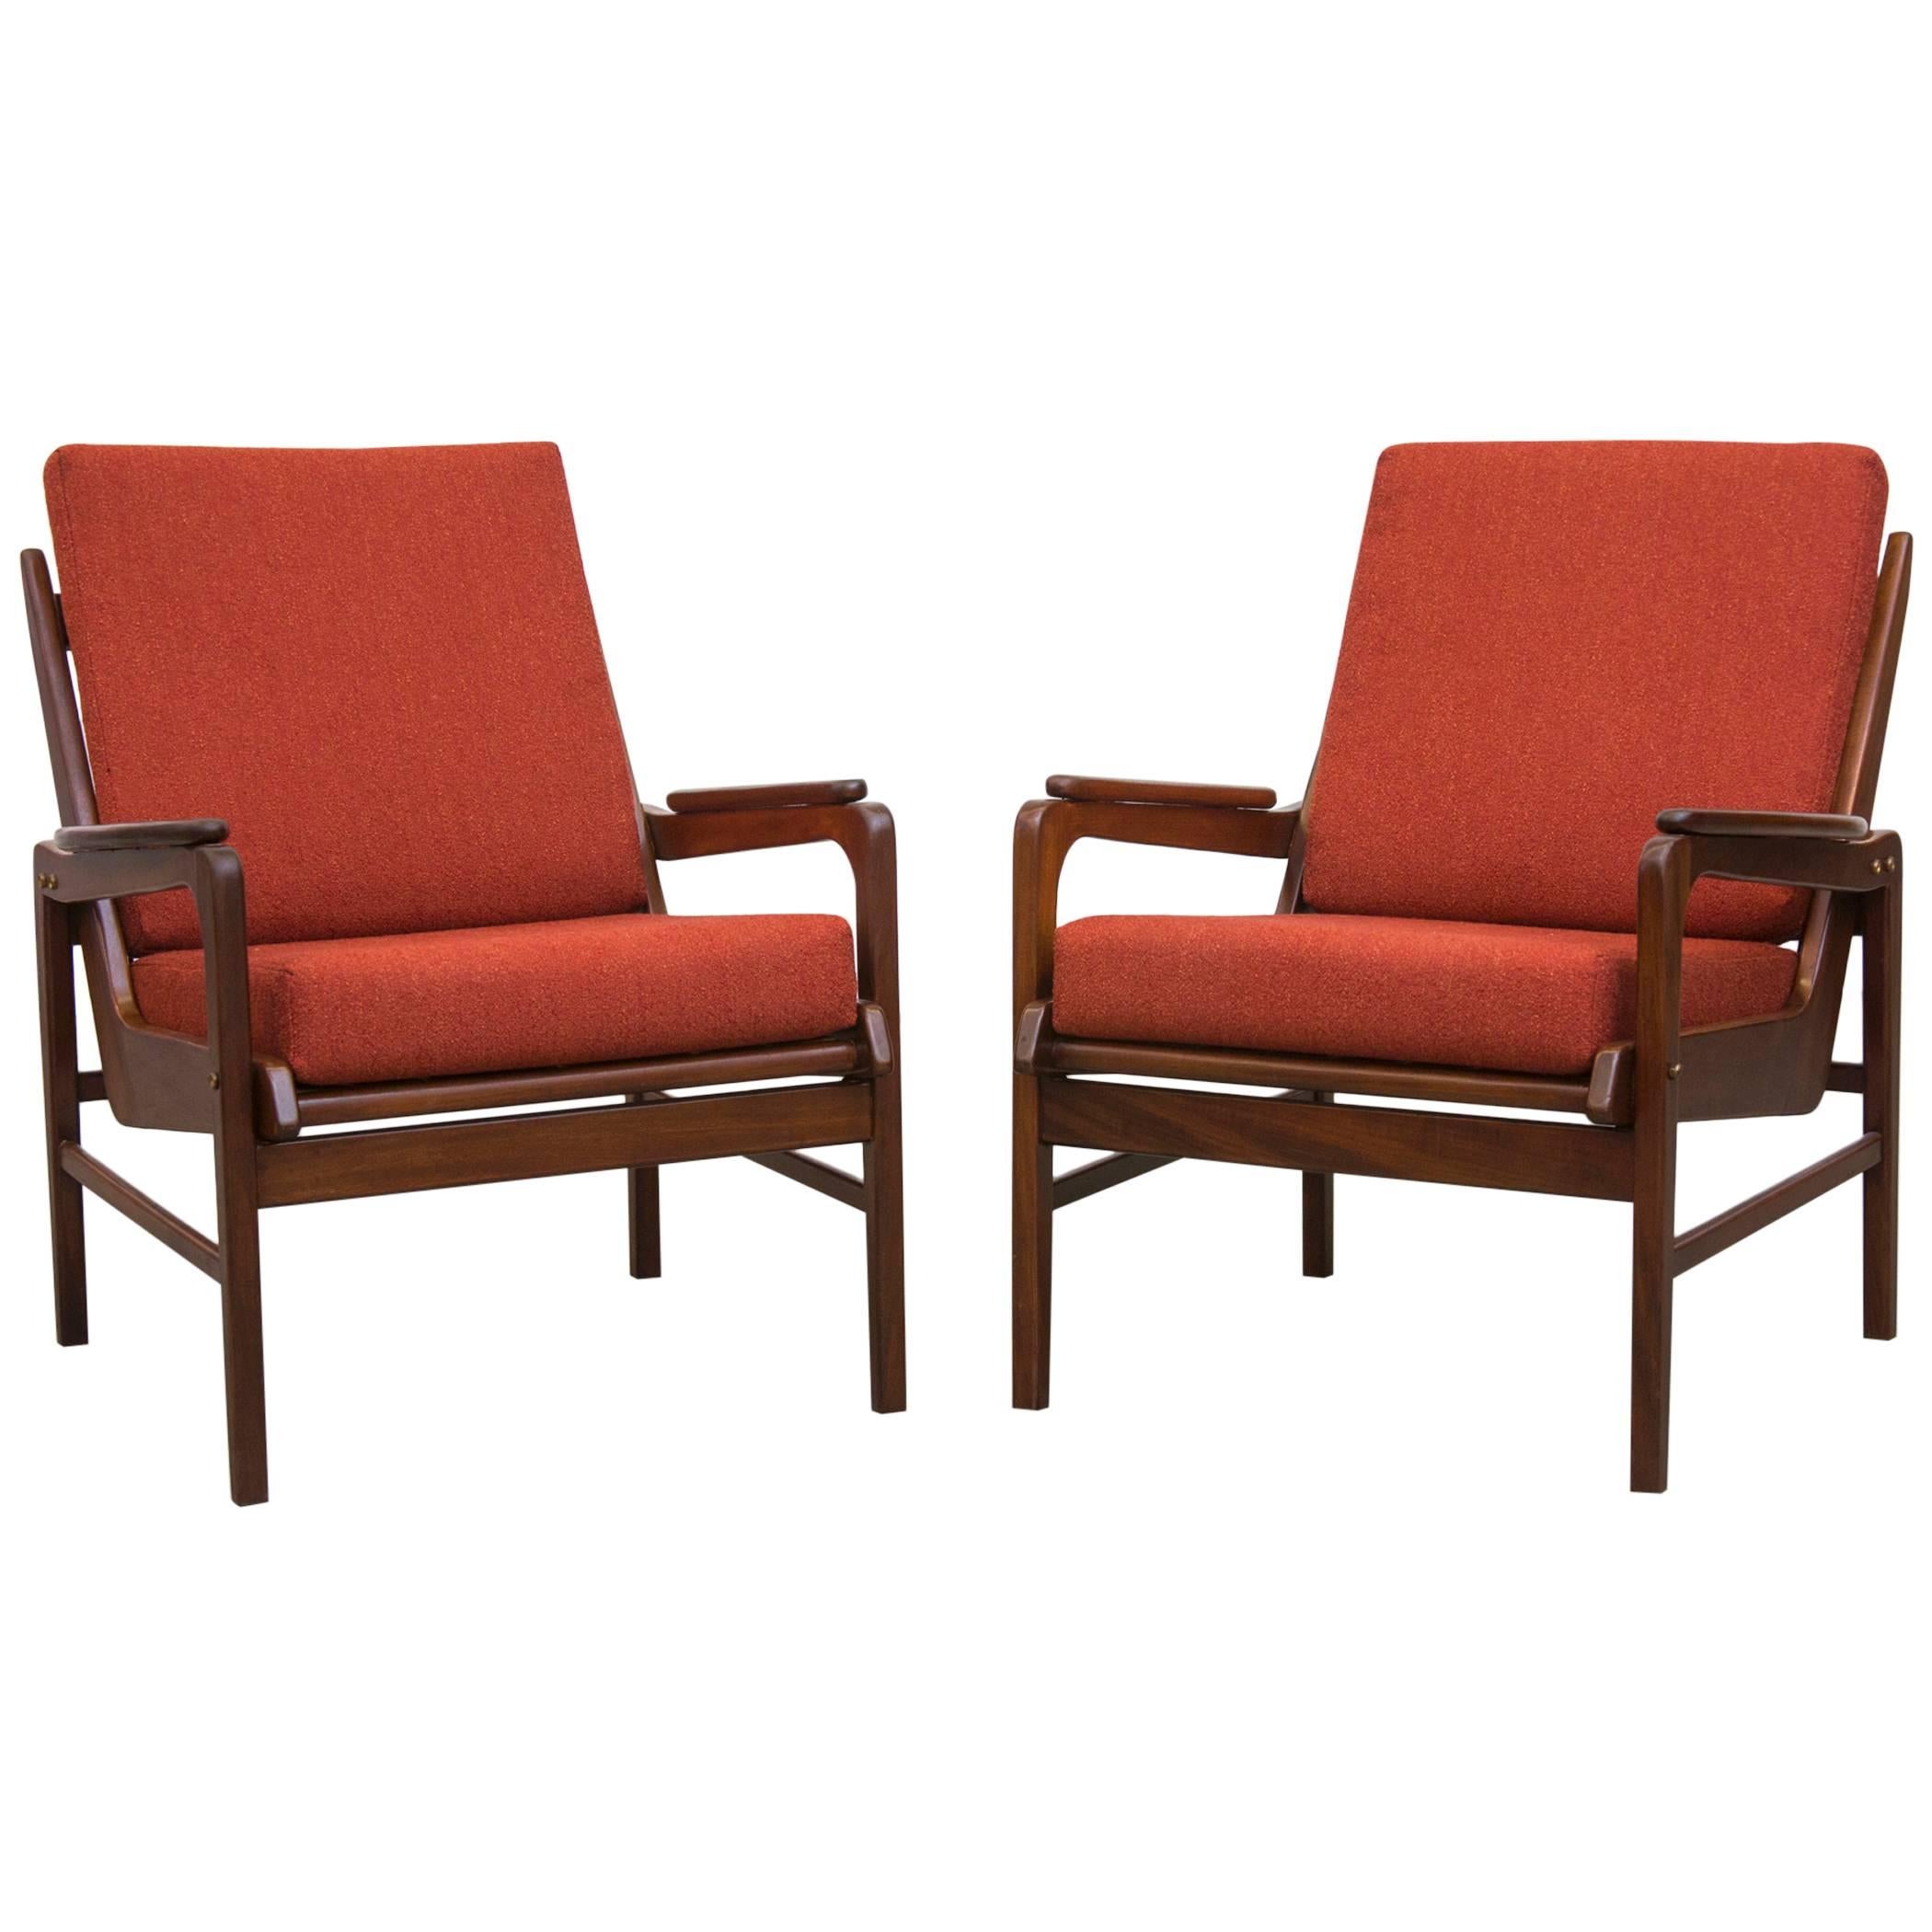 Pair of Low Teak Robert Parry 1950s Lounge Chairs